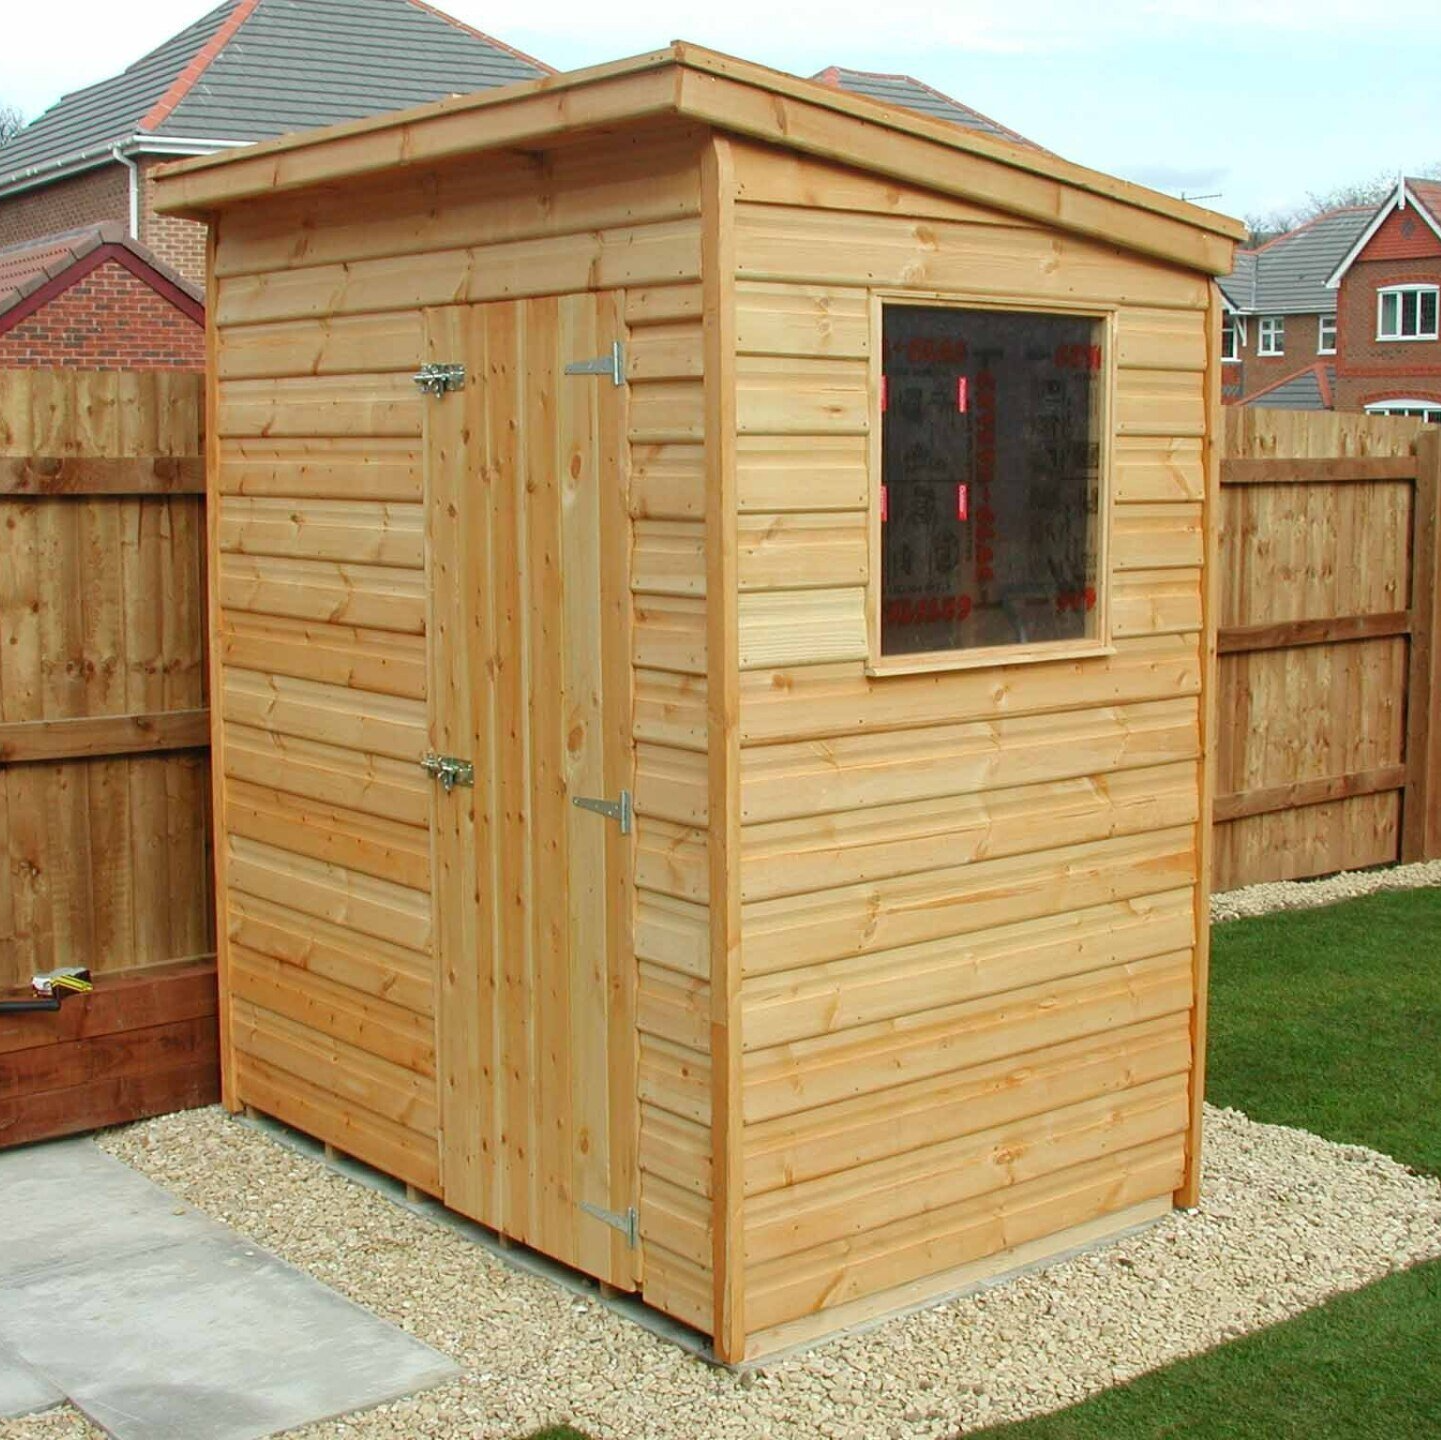 6' x 4' Pent shed with door on 6' side then a window on the 4' side.